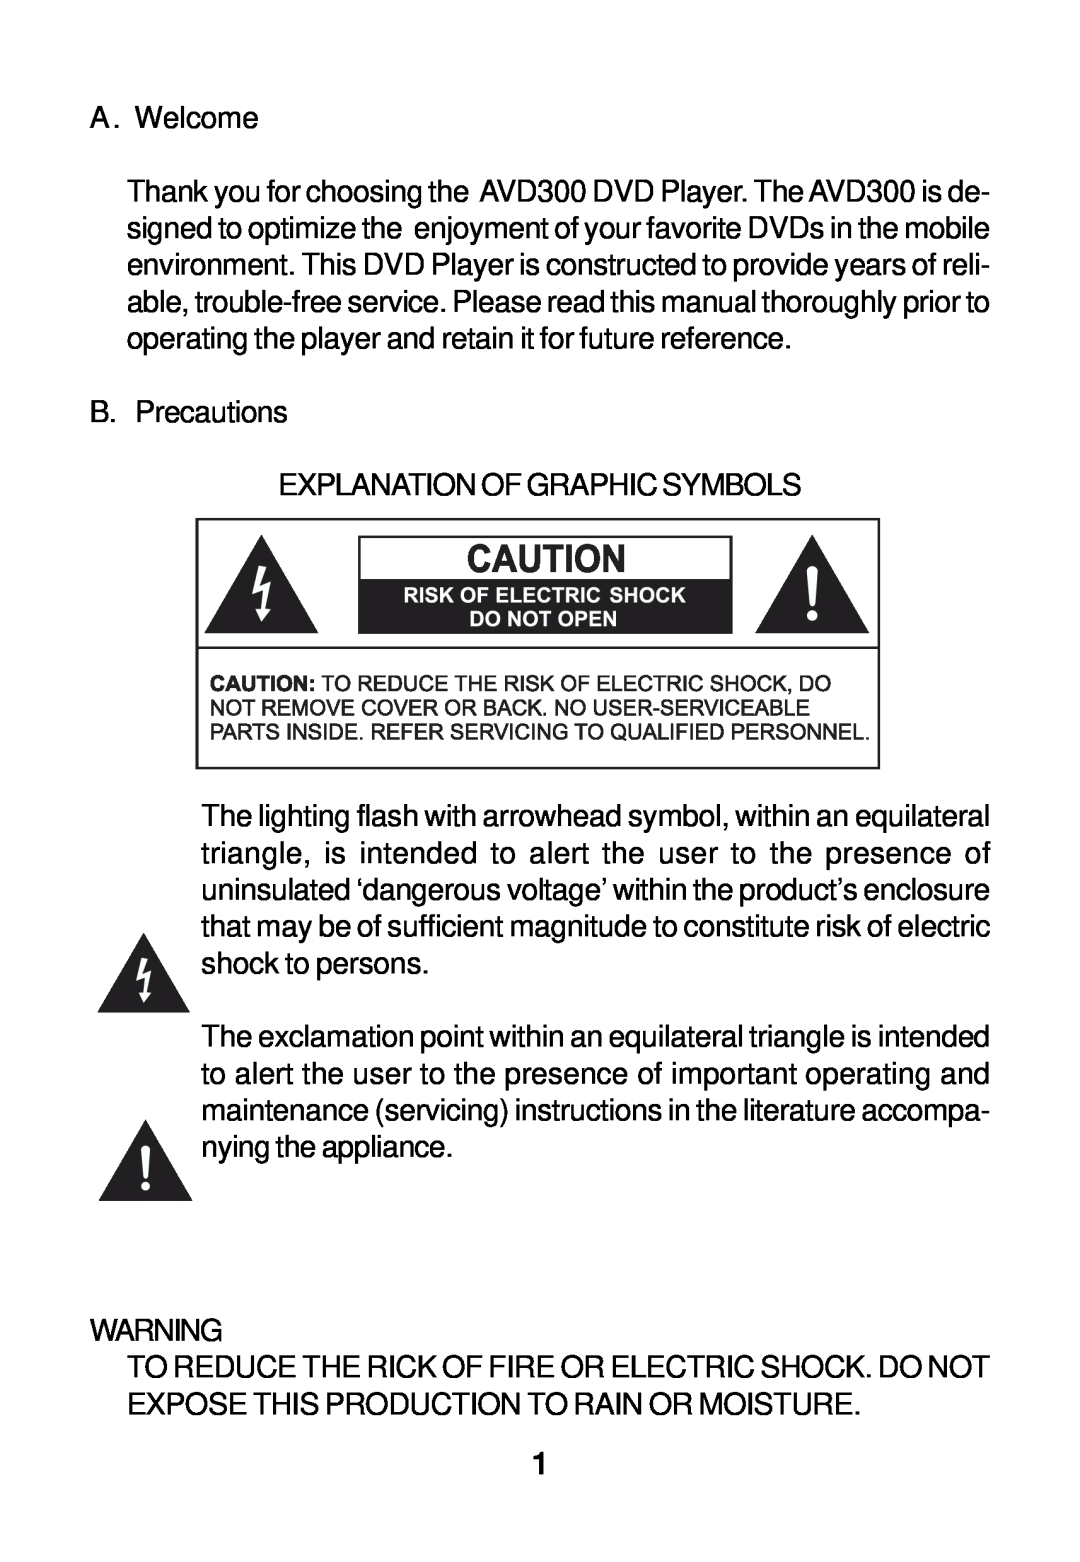 Audiovox AVD300 owner manual A . Welcome, B. Precautions EXPLANATION OF GRAPHIC SYMBOLS 